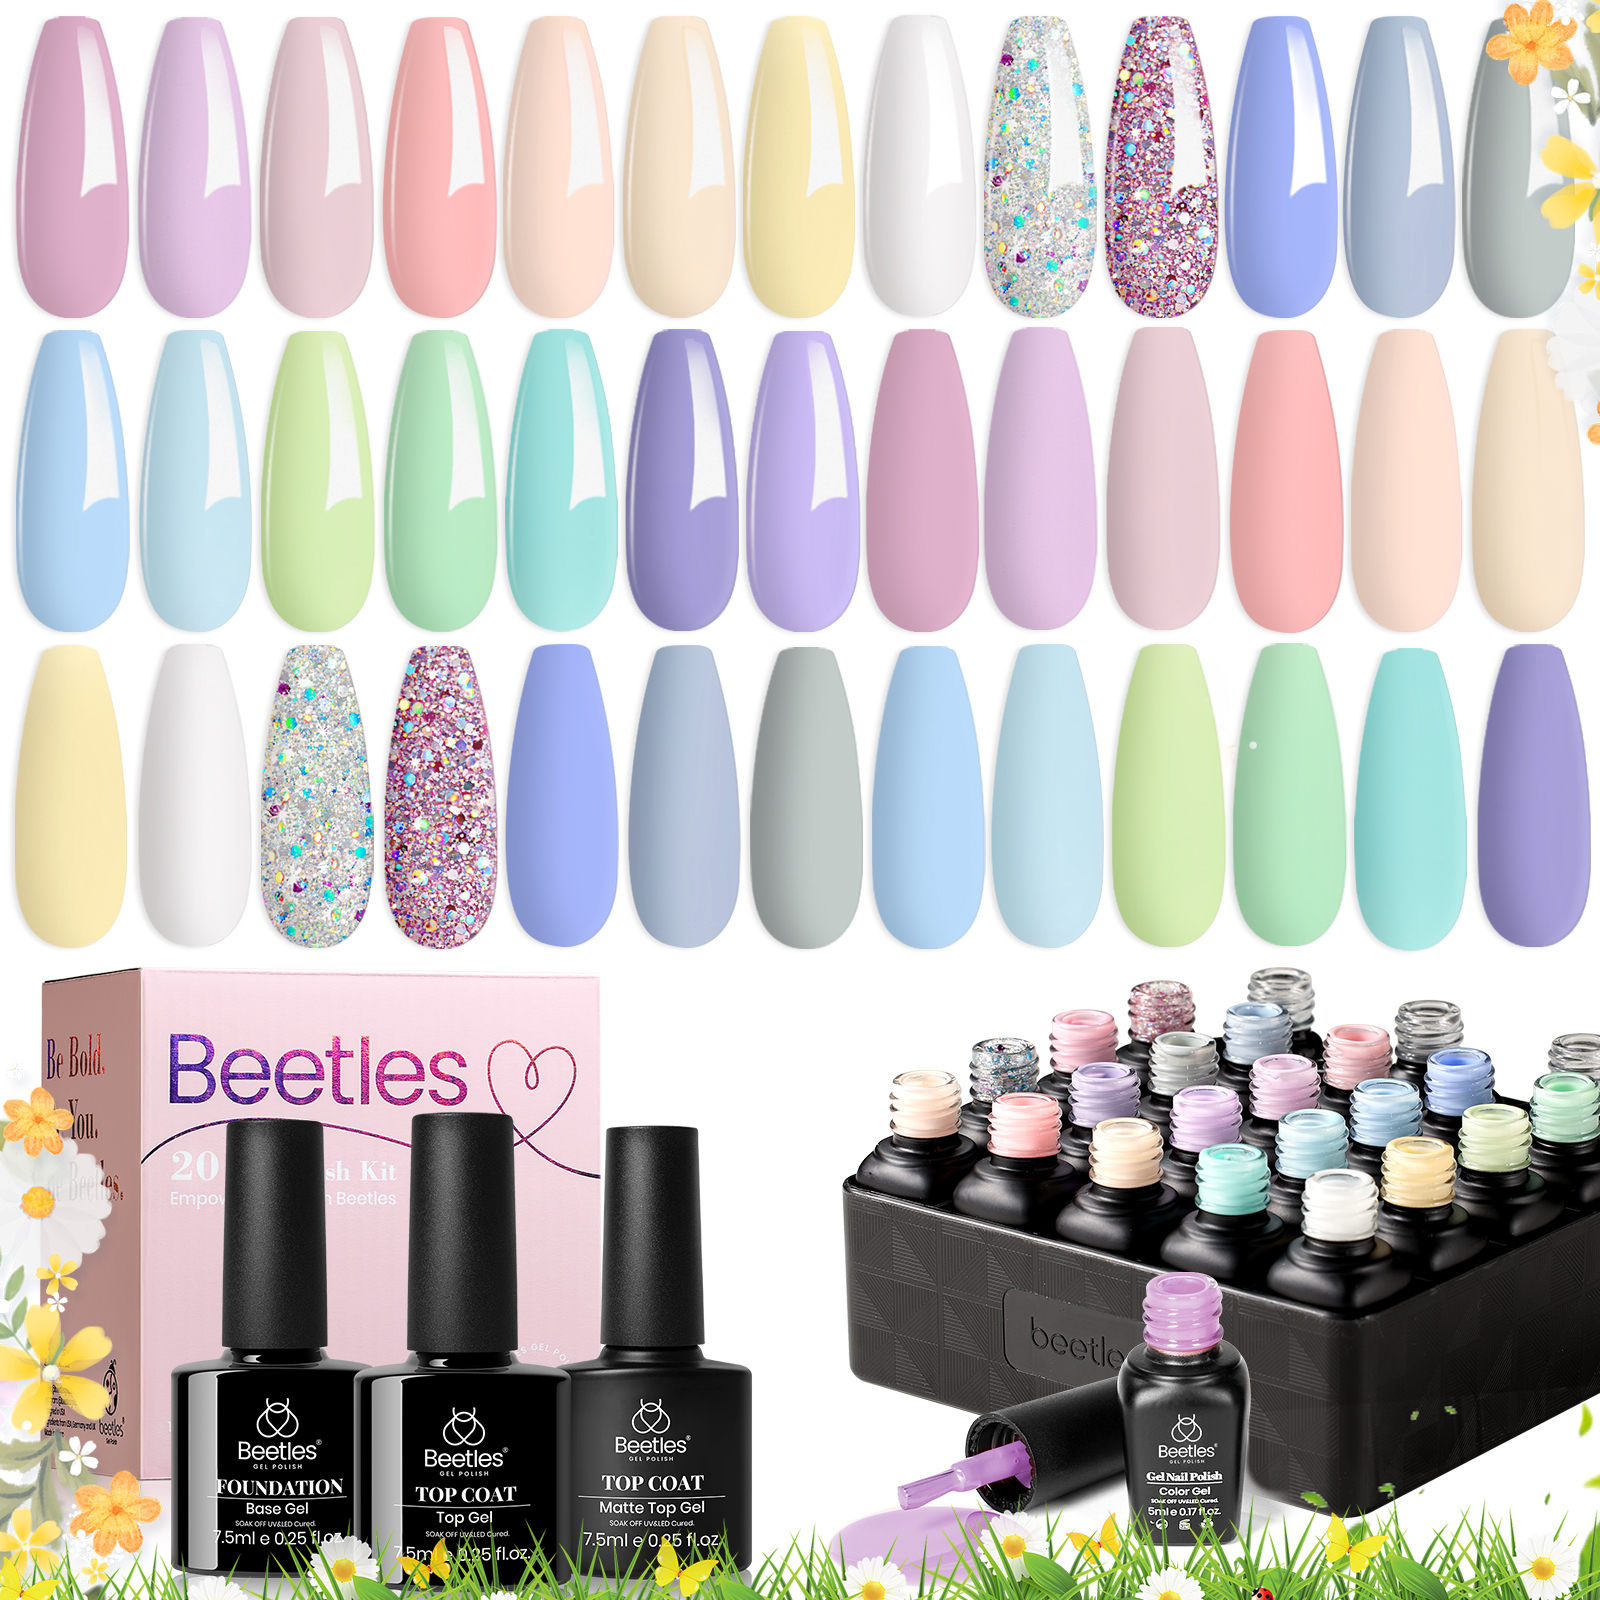 Complete Gel Matte Nail Polish Set In With 3 Base Coats, Matte & Glossy  Coating Ideal For Home Salon Nails Art DIY From Chinabrands, $27.05 |  DHgate.Com